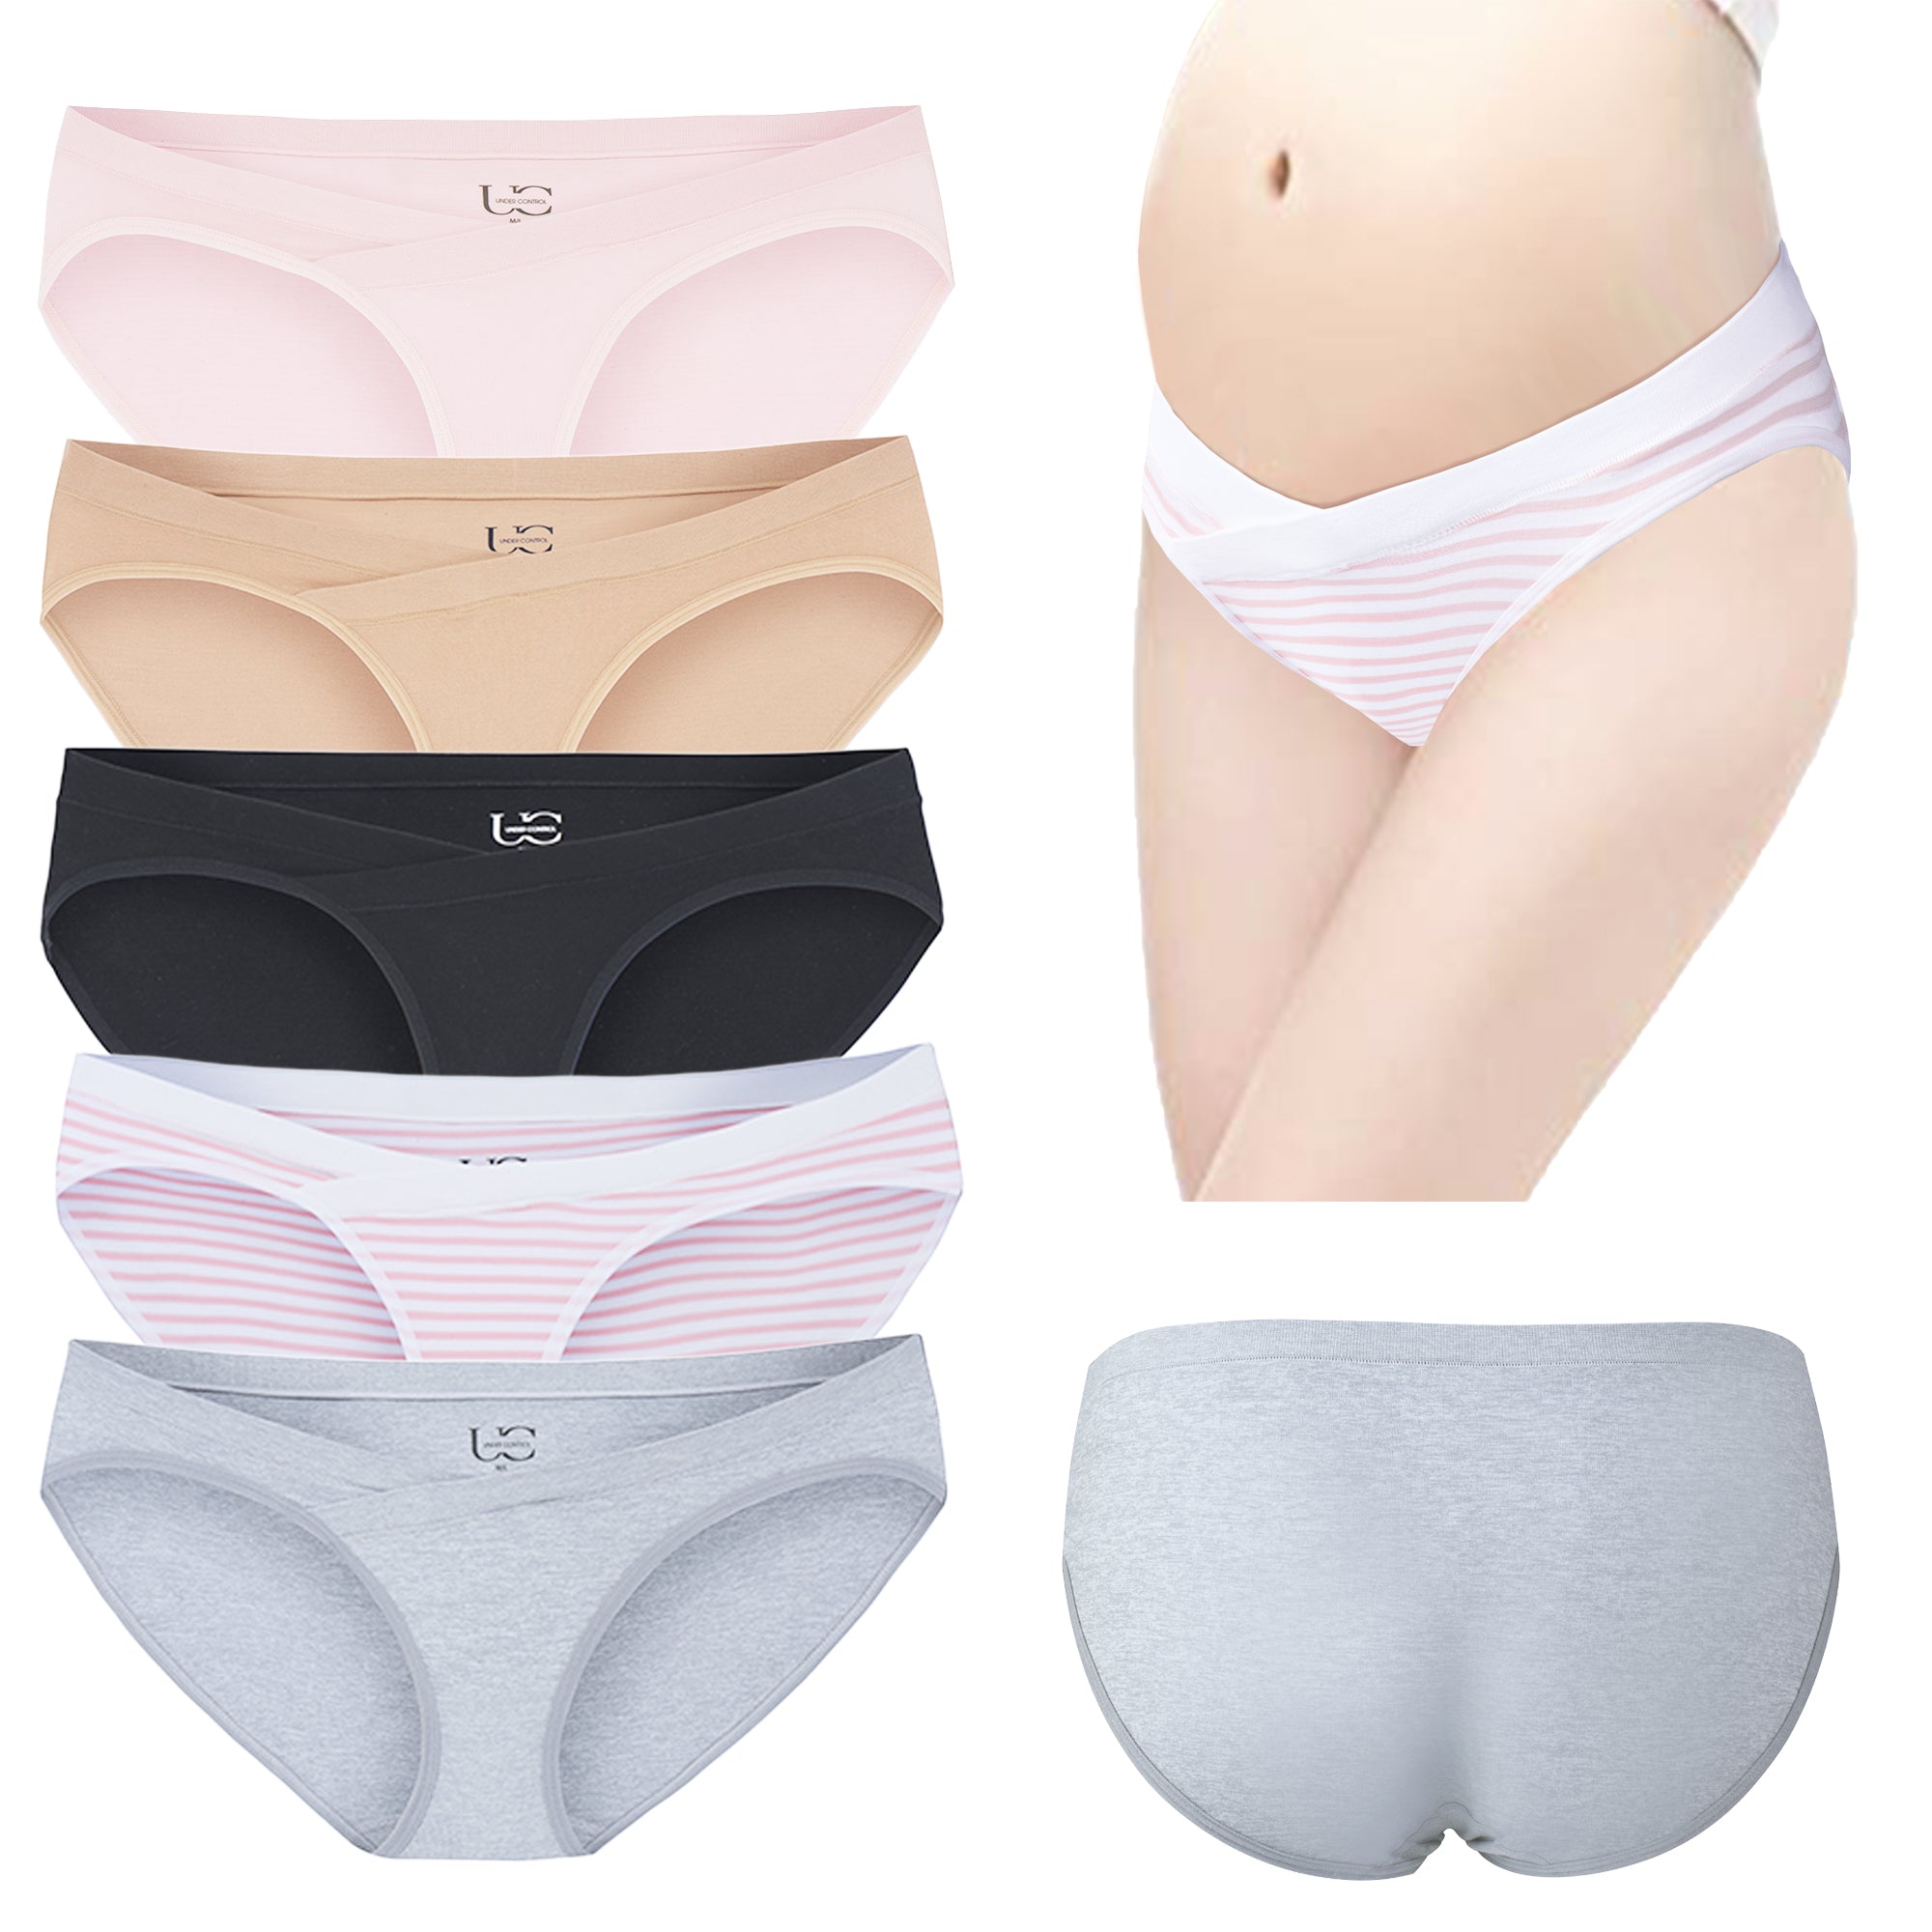 A guide to maternity knickers